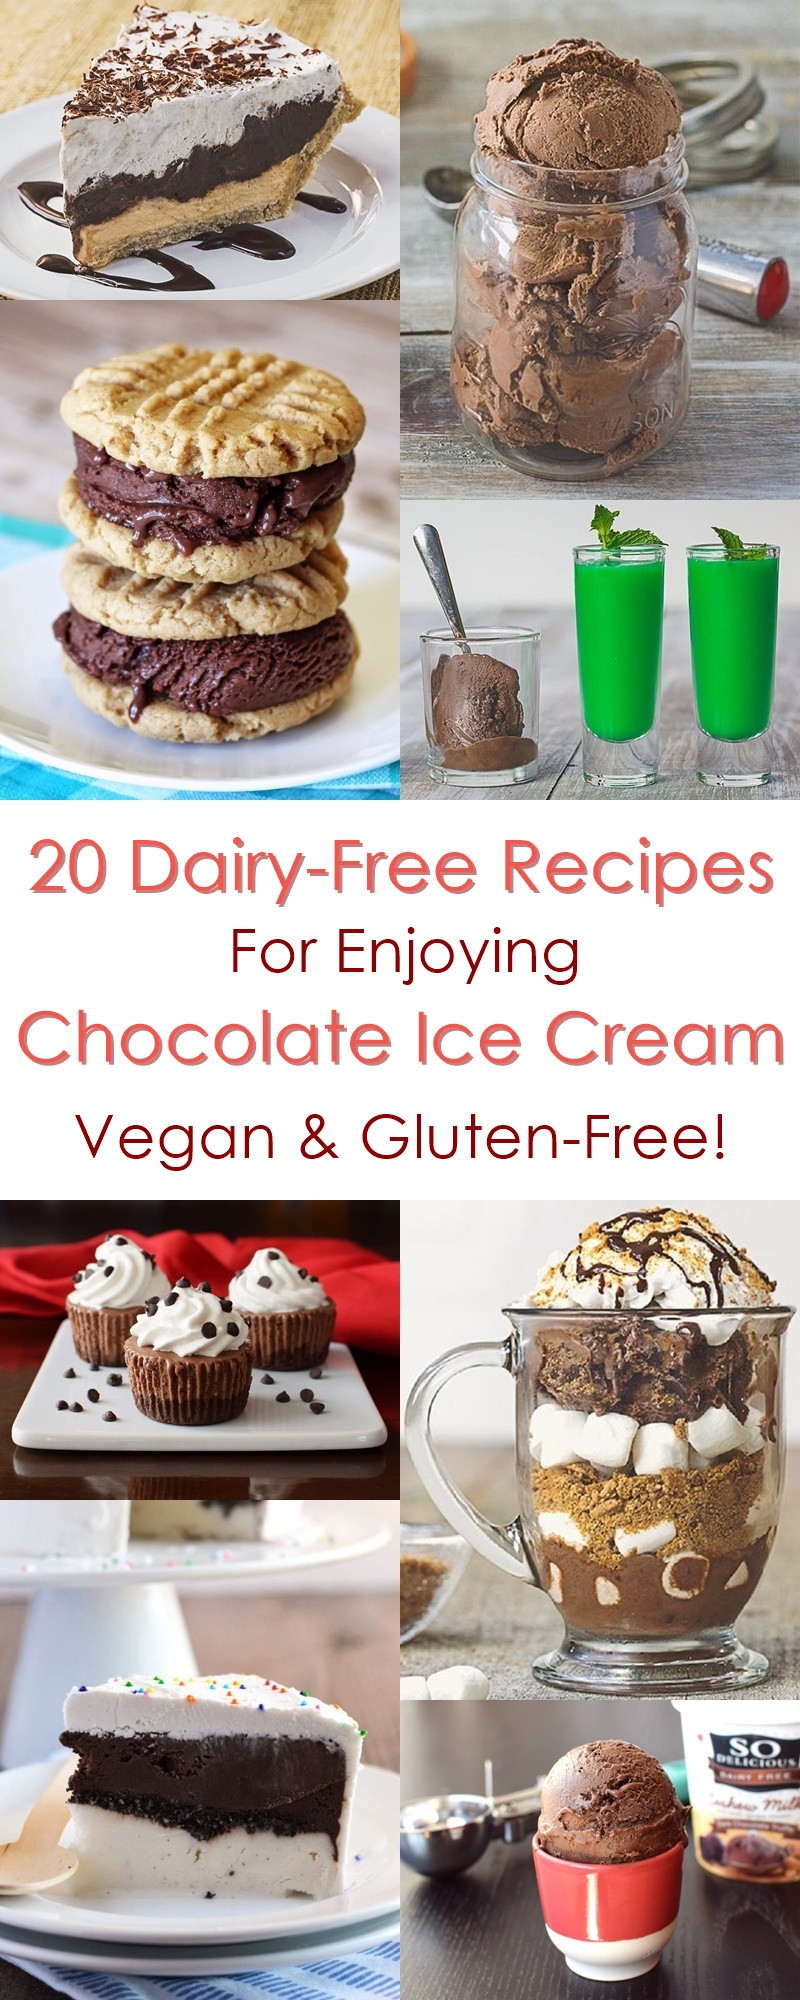 Soy And Dairy Free Recipes
 20 Sweet Dairy Free Recipes Using Chocolate Ice Cream